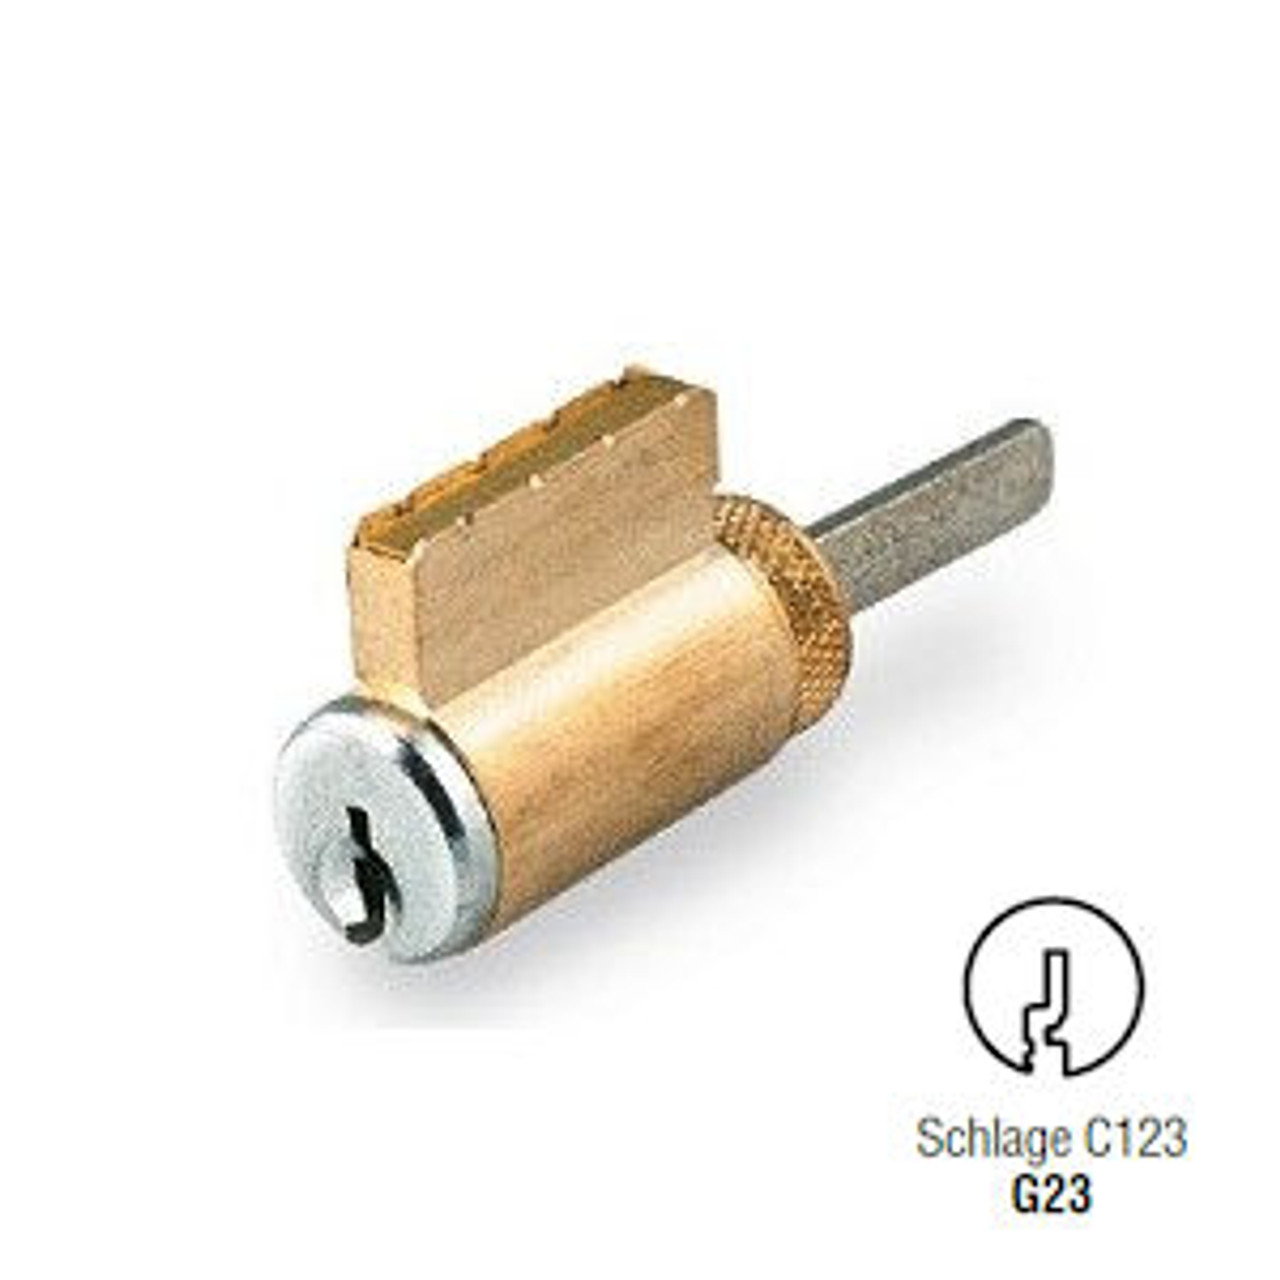 Schlage Cylinders for KC-Series Cables Key In Knob Portable Security Locks  